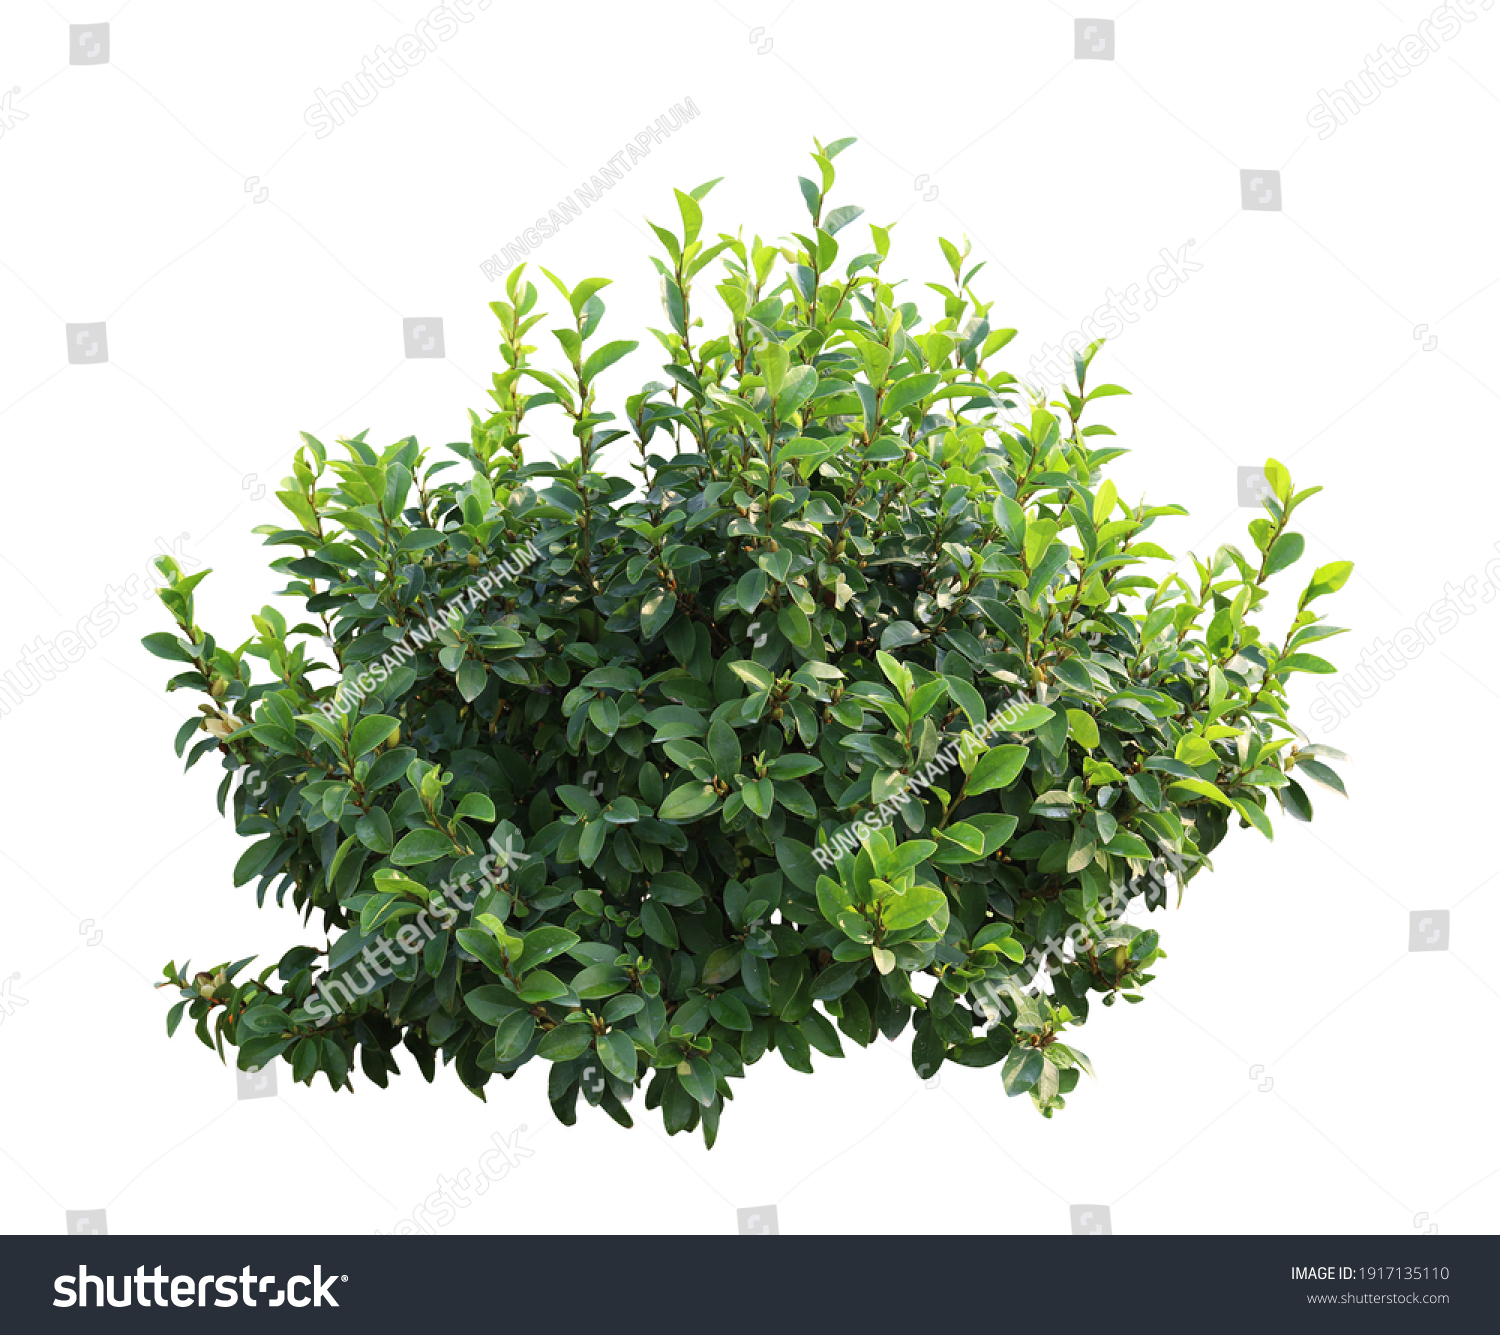 Tropical plant flower bush tree isolated on white background with clipping path #1917135110